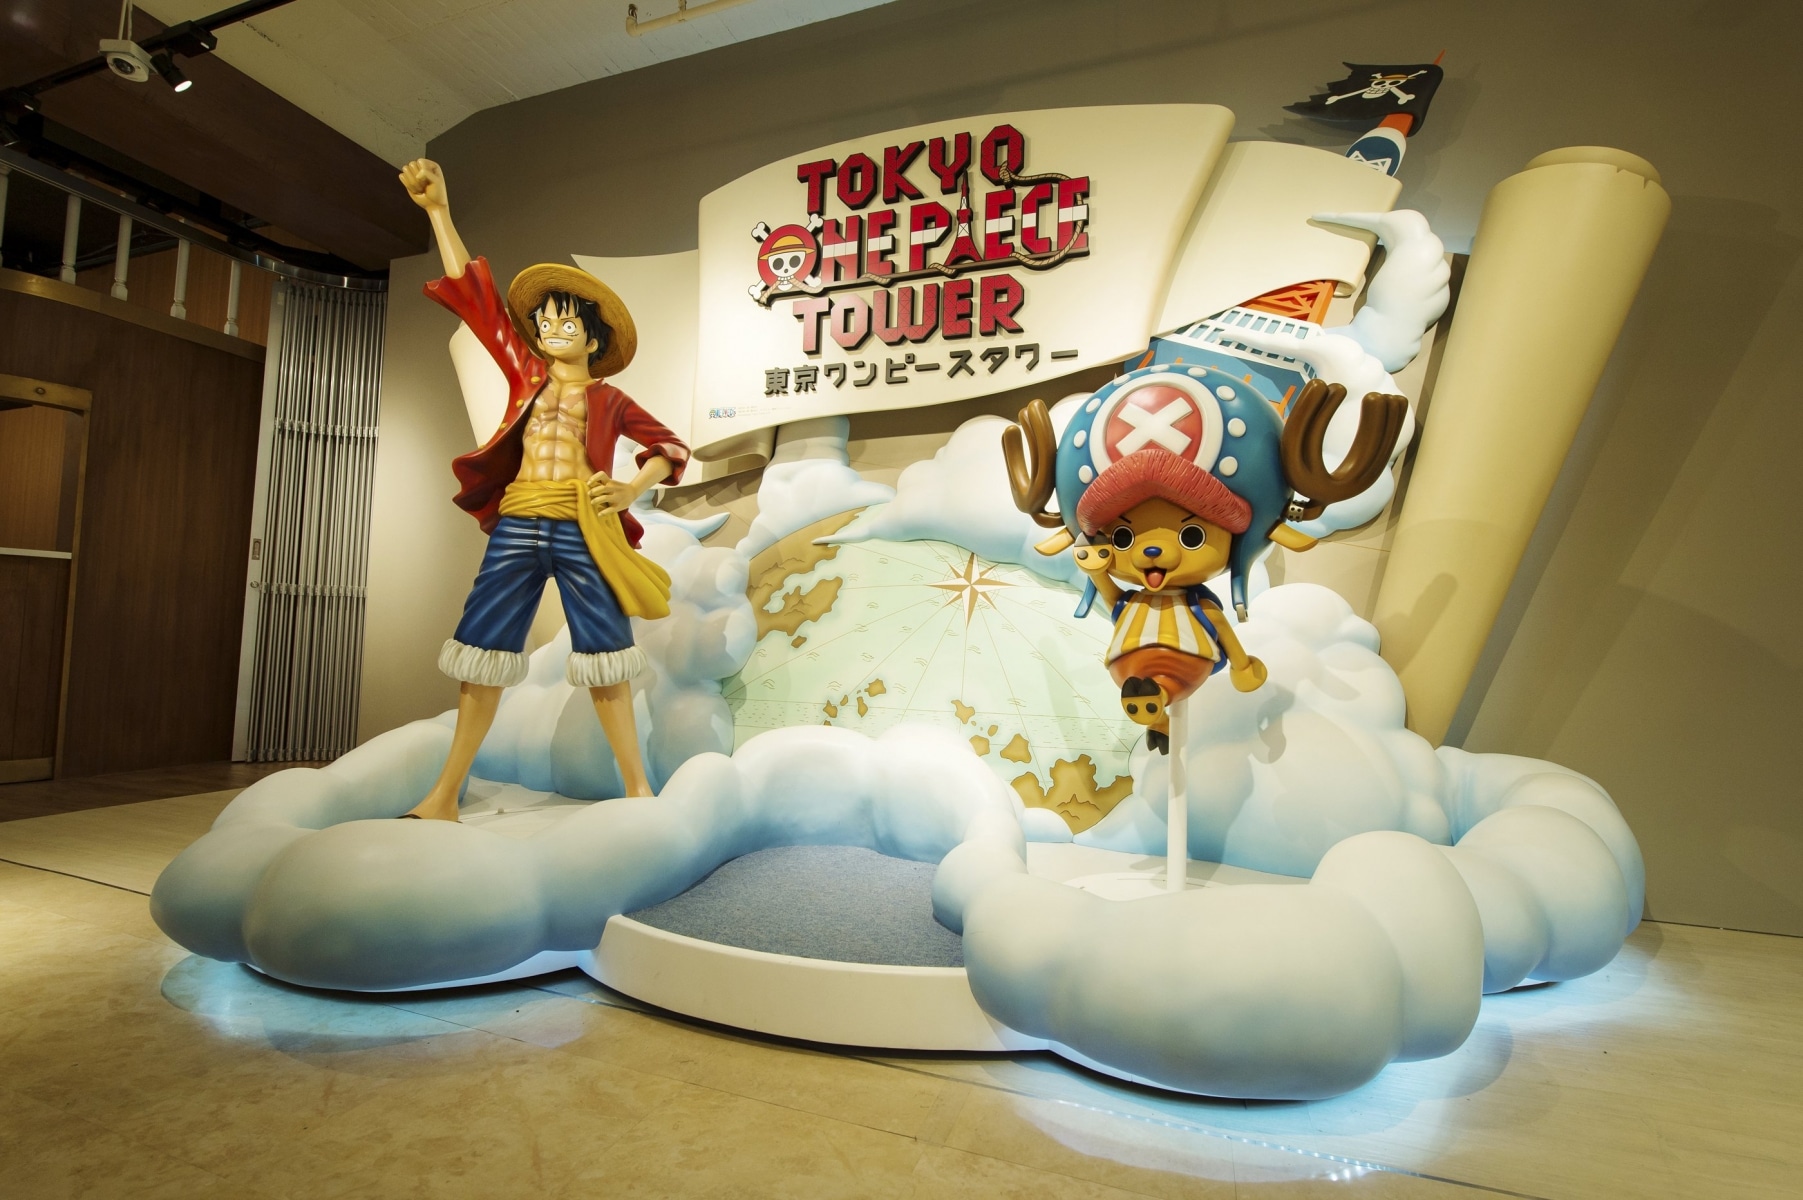 Tokyo Tower - Tokyo One Piece Tower (befreetour)